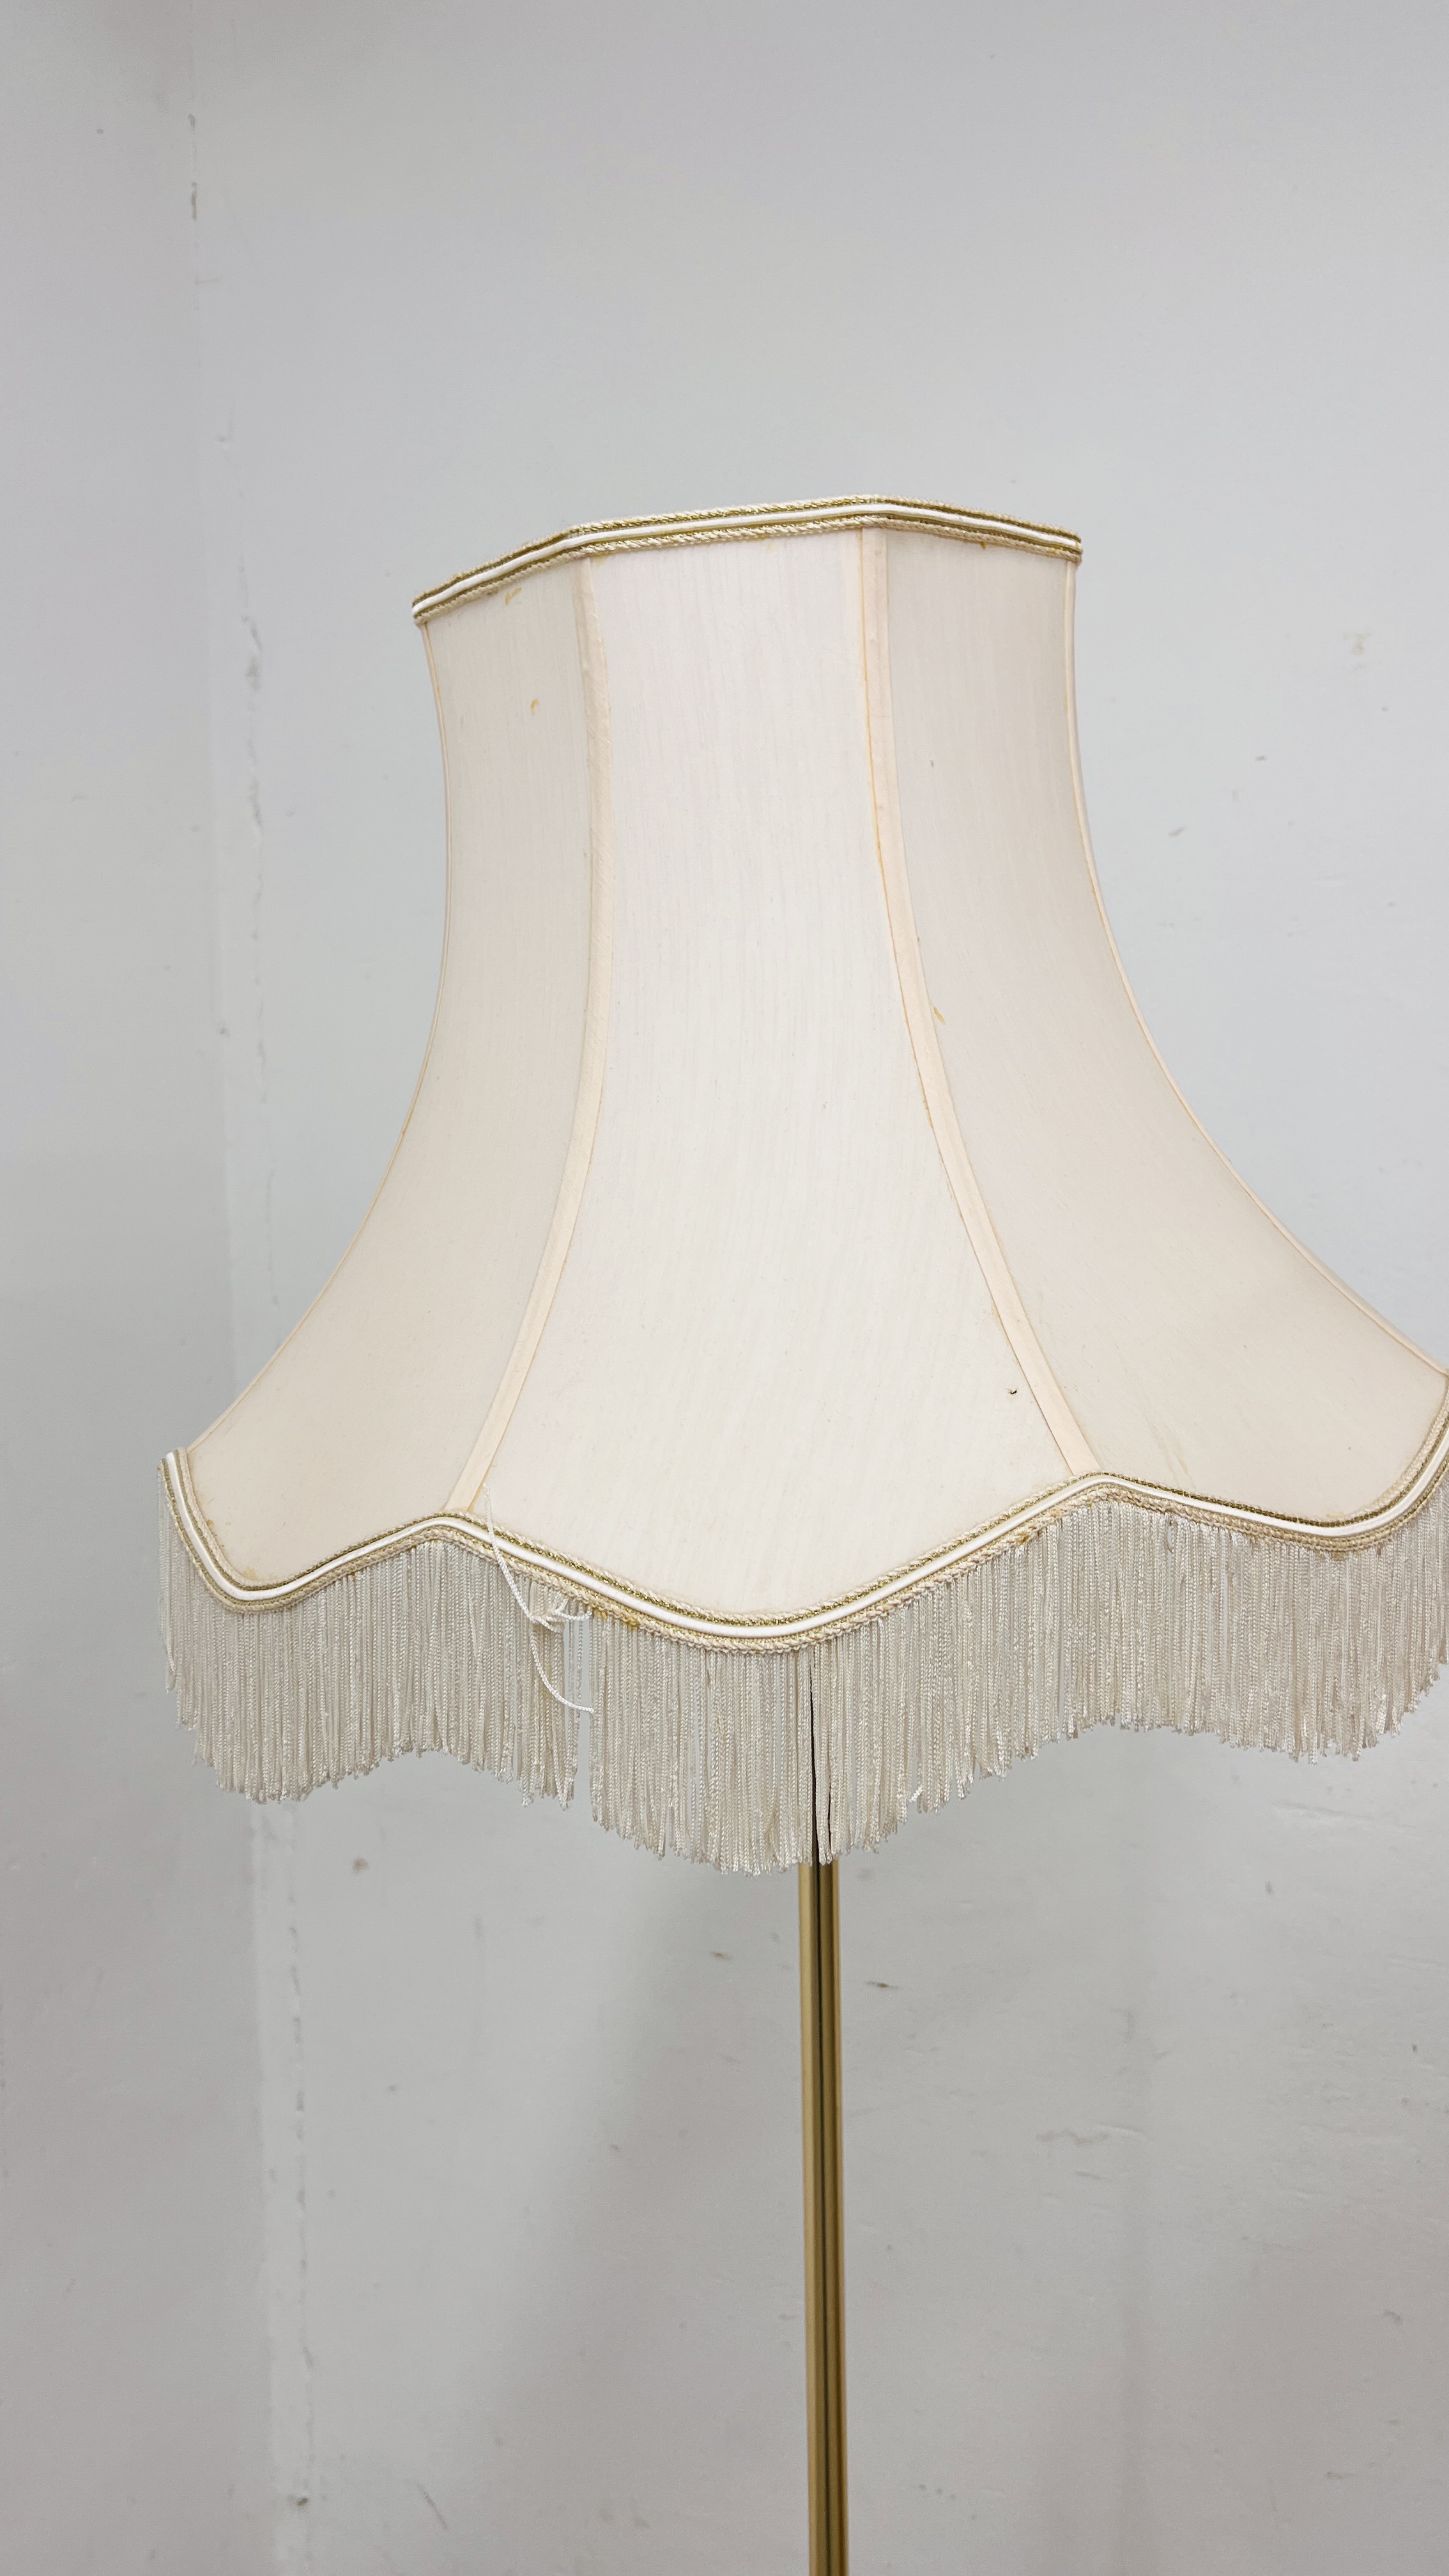 A RETRO BEECH WOOD TRIPOD FOOTED STANDARD LAMP WITH SHADE - WIRE REMOVED - DECO STYLE STANDARD LAMP - Image 4 of 8